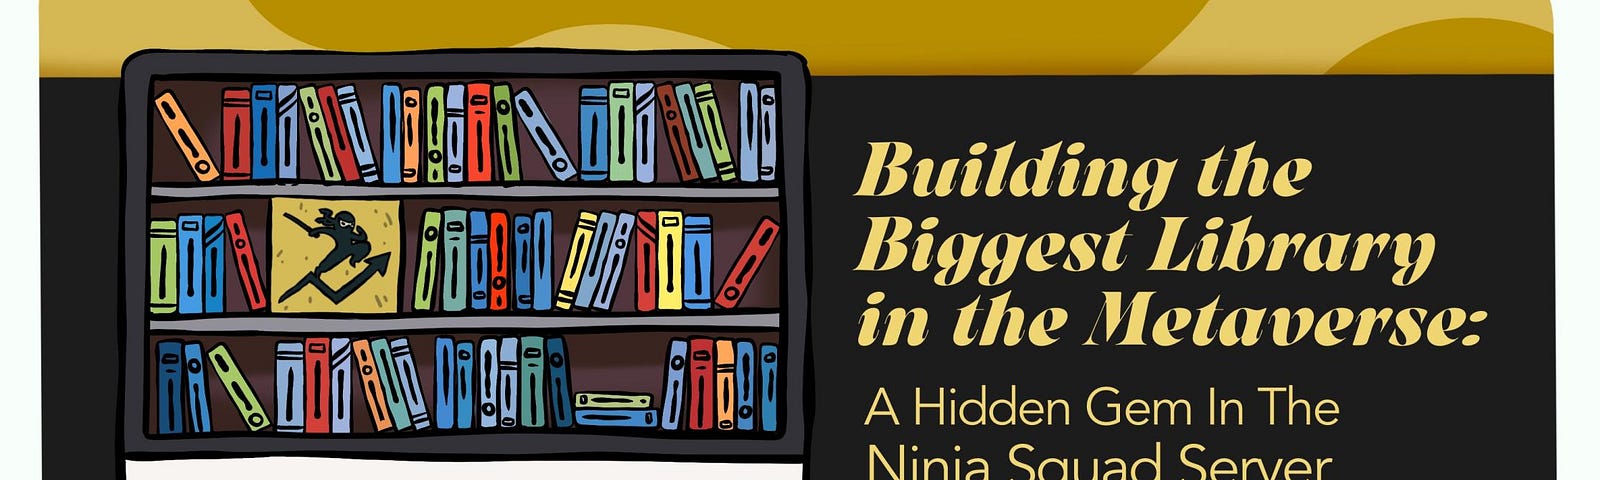 Building The Biggest Library in The Metaverse: A Hidden Gem In The Ninja Squad Server — Fundamental Analysis Library